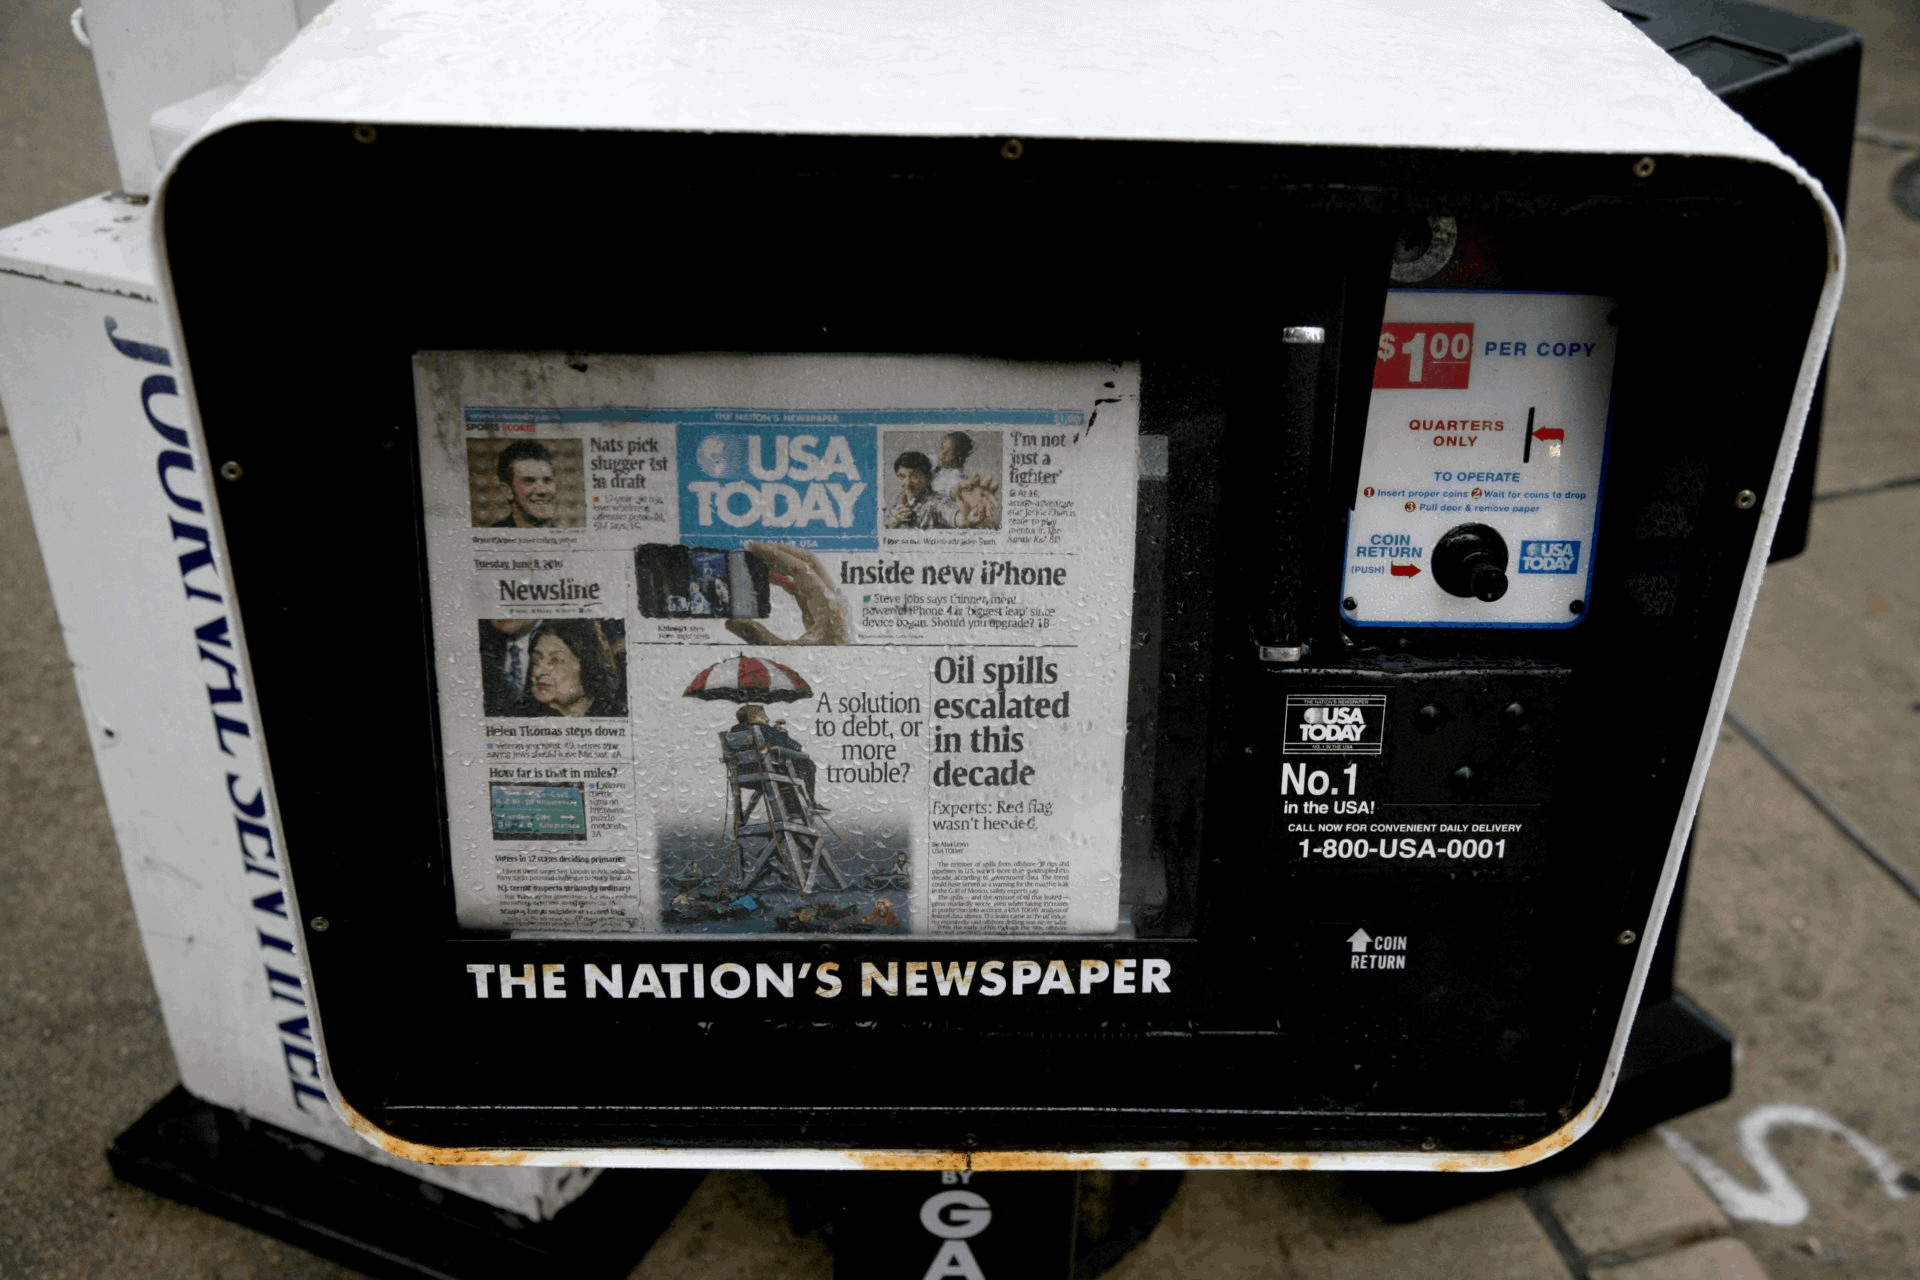 Newspaper dispenser with a copy of USA Today